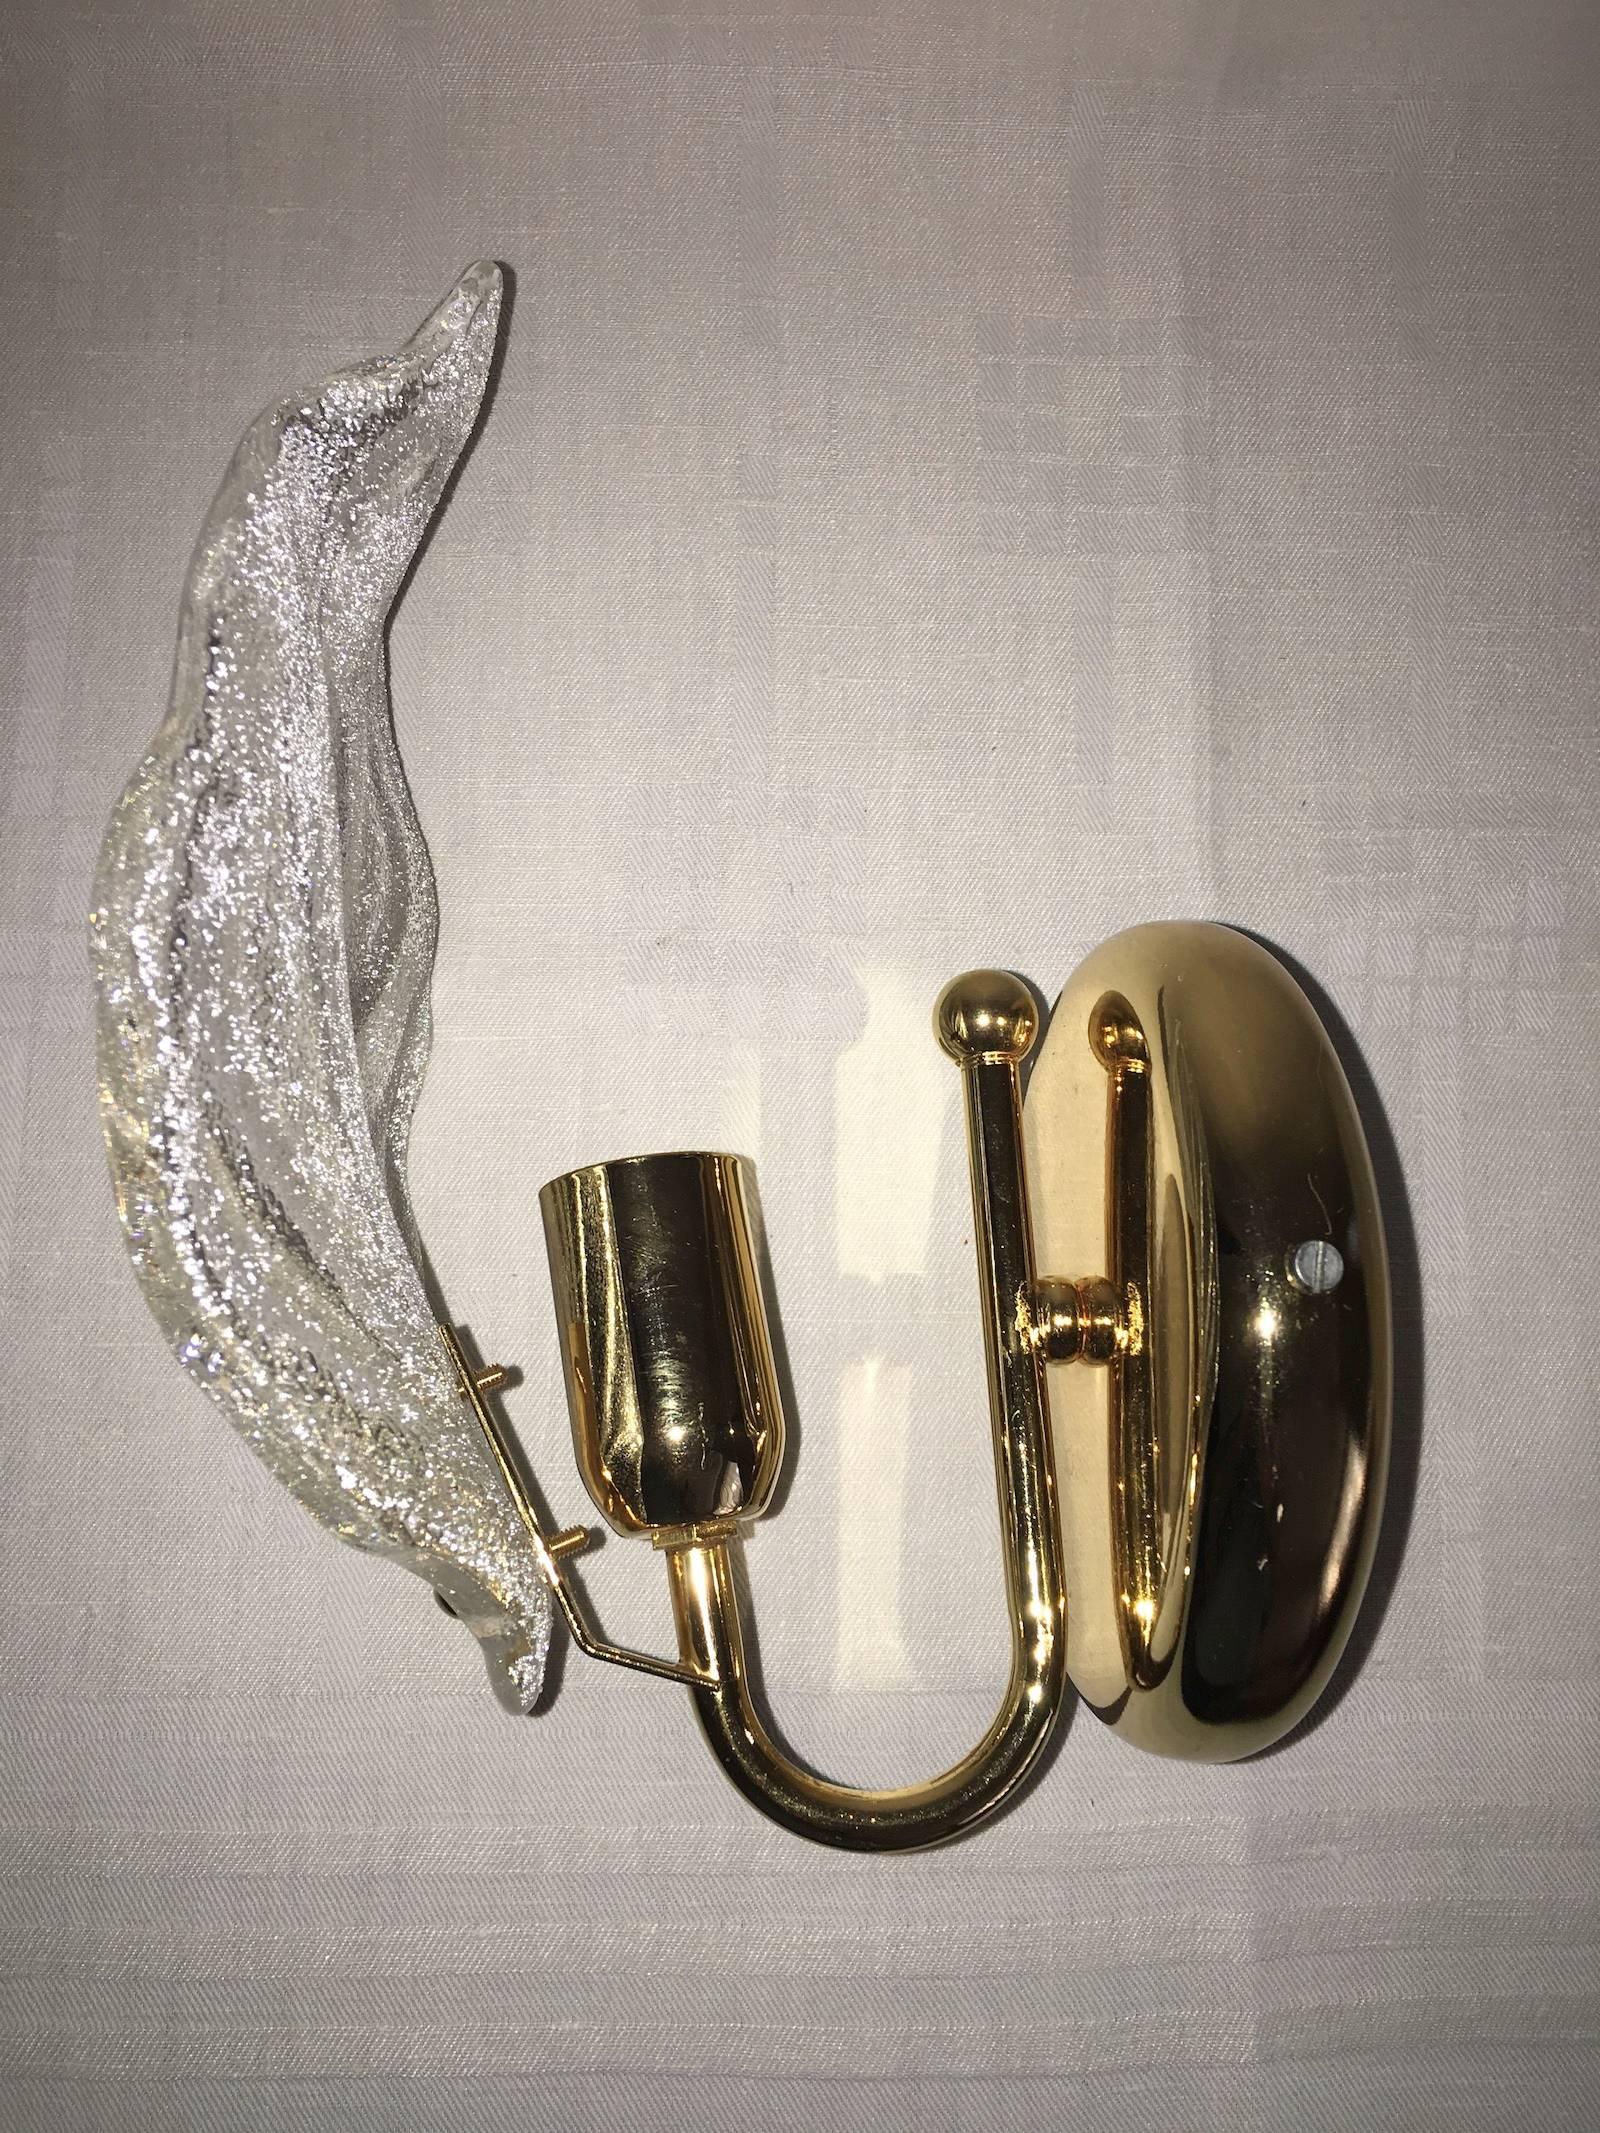 Pair of Leaf Murano Glass Wall Sconces In Good Condition For Sale In Frisco, TX